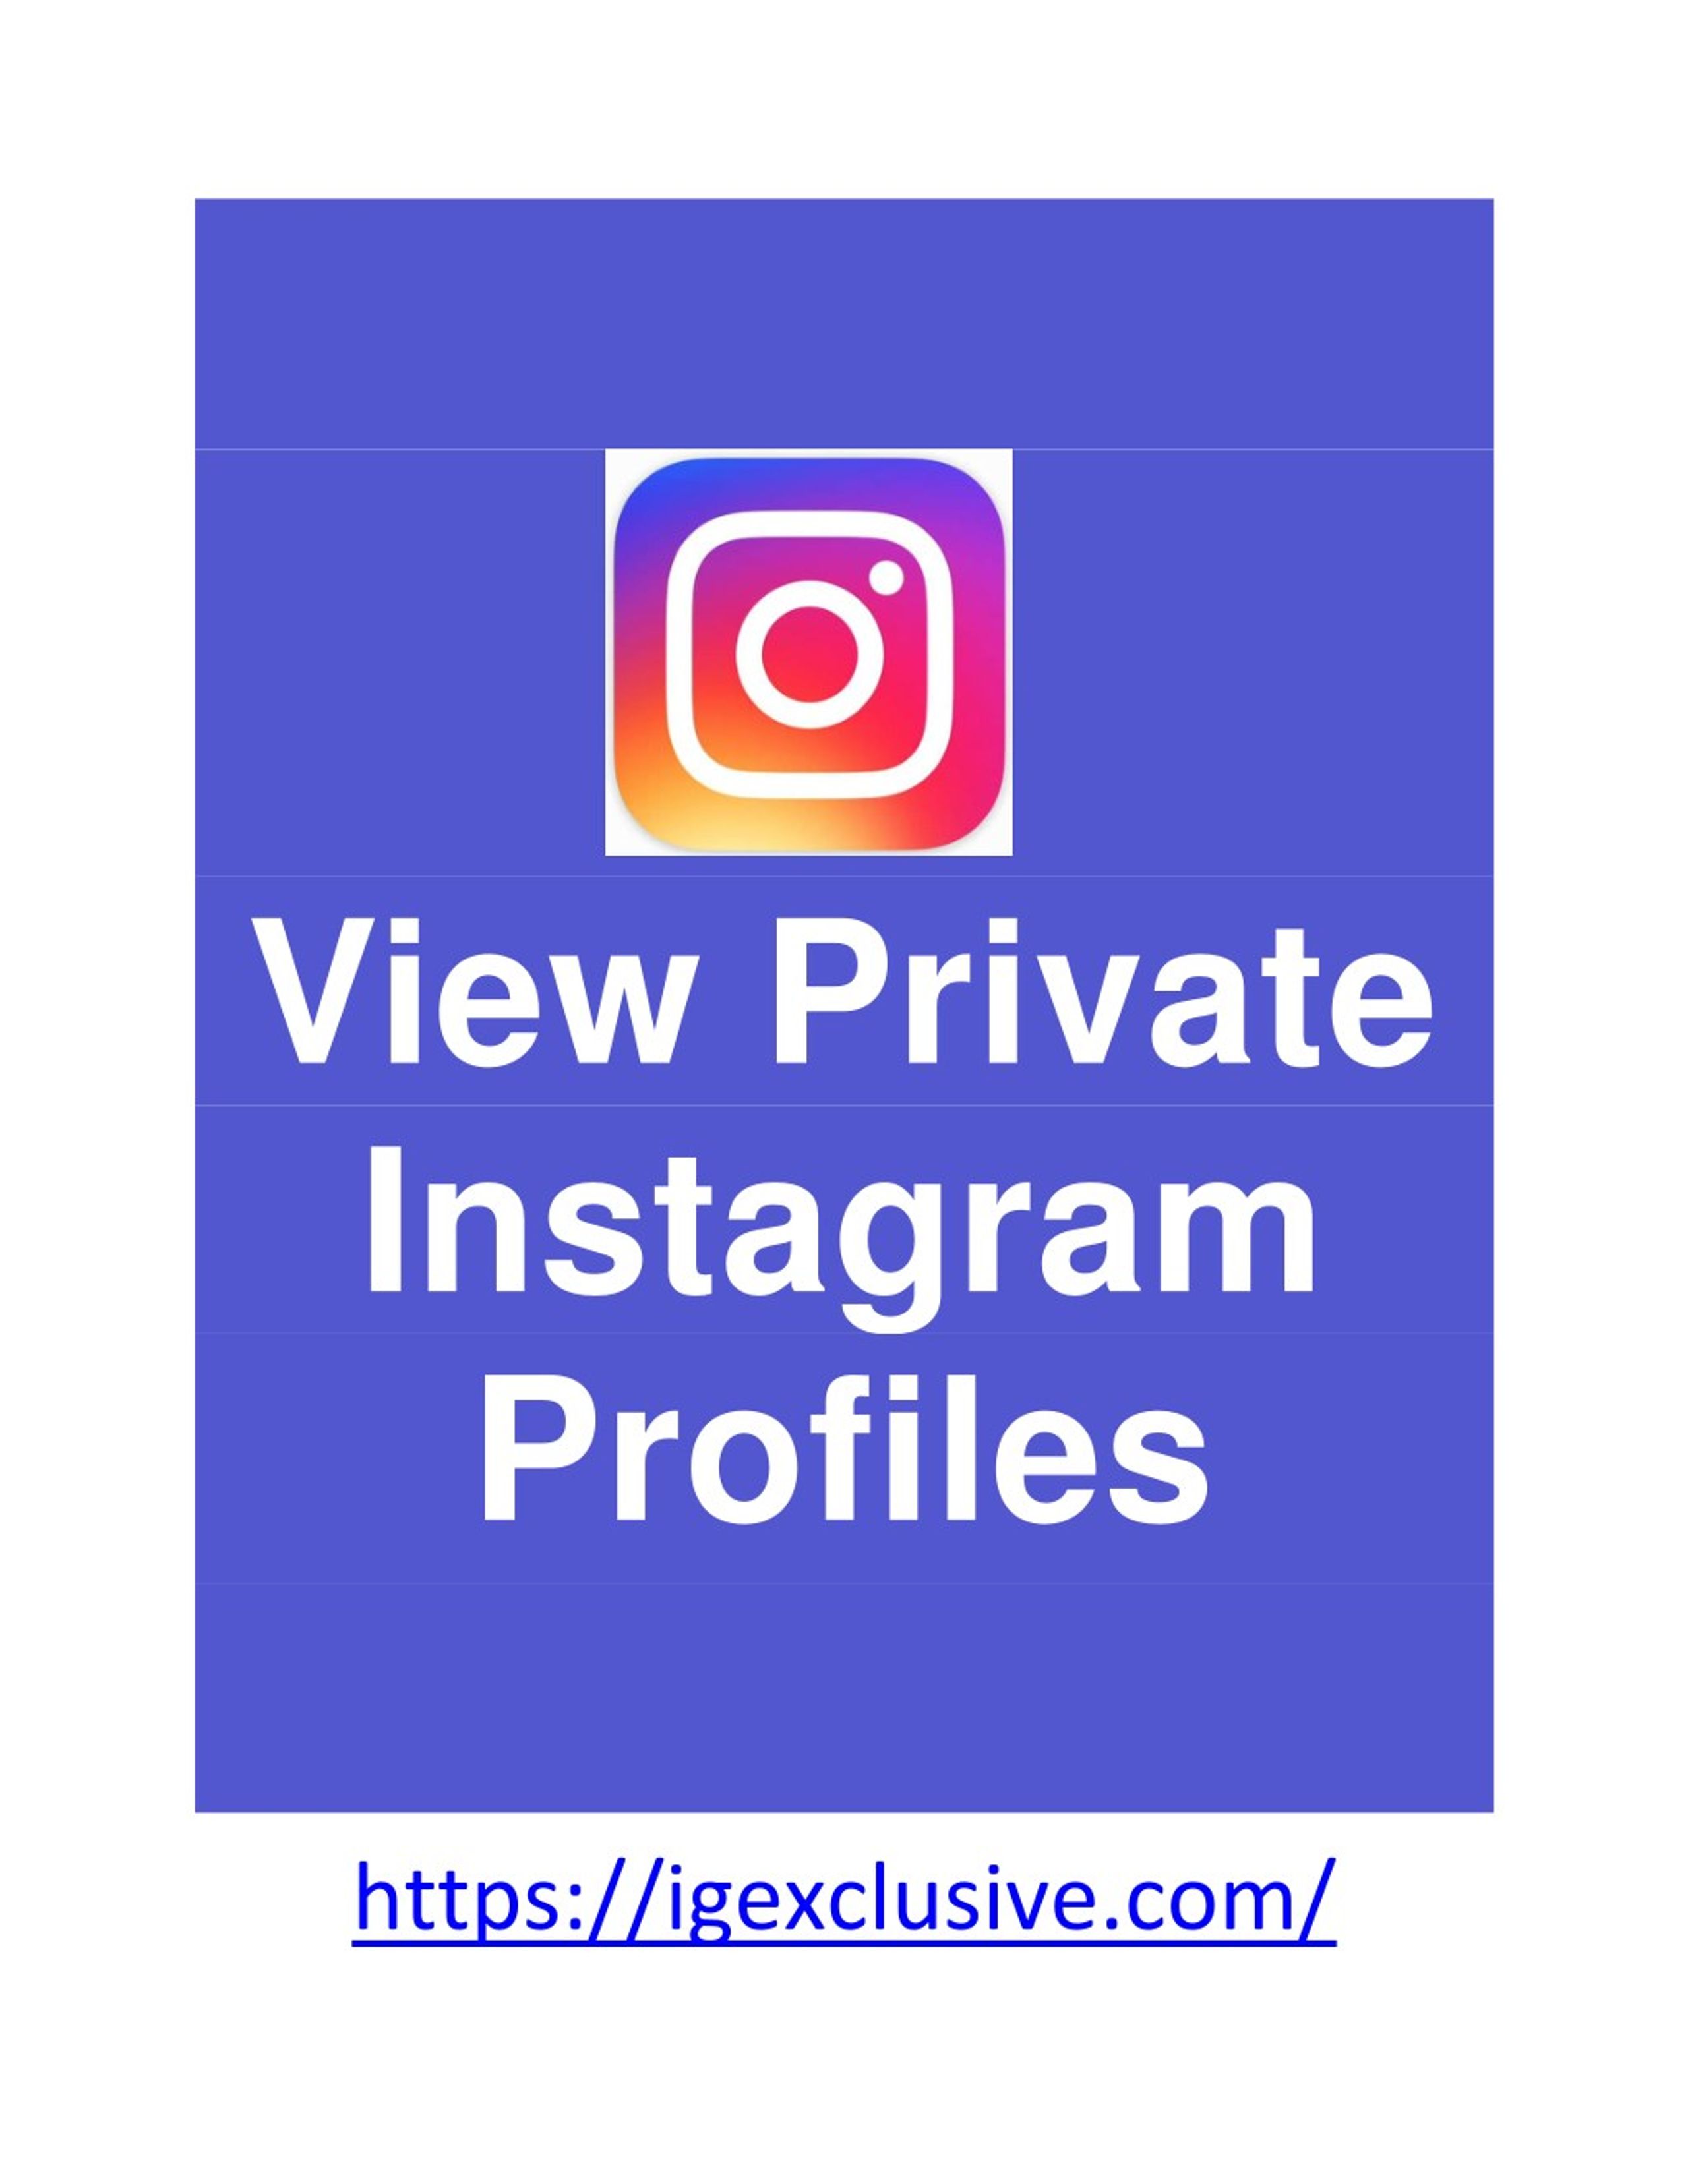 Best Anonymous Instagram Viewer tool to View Private IG Account